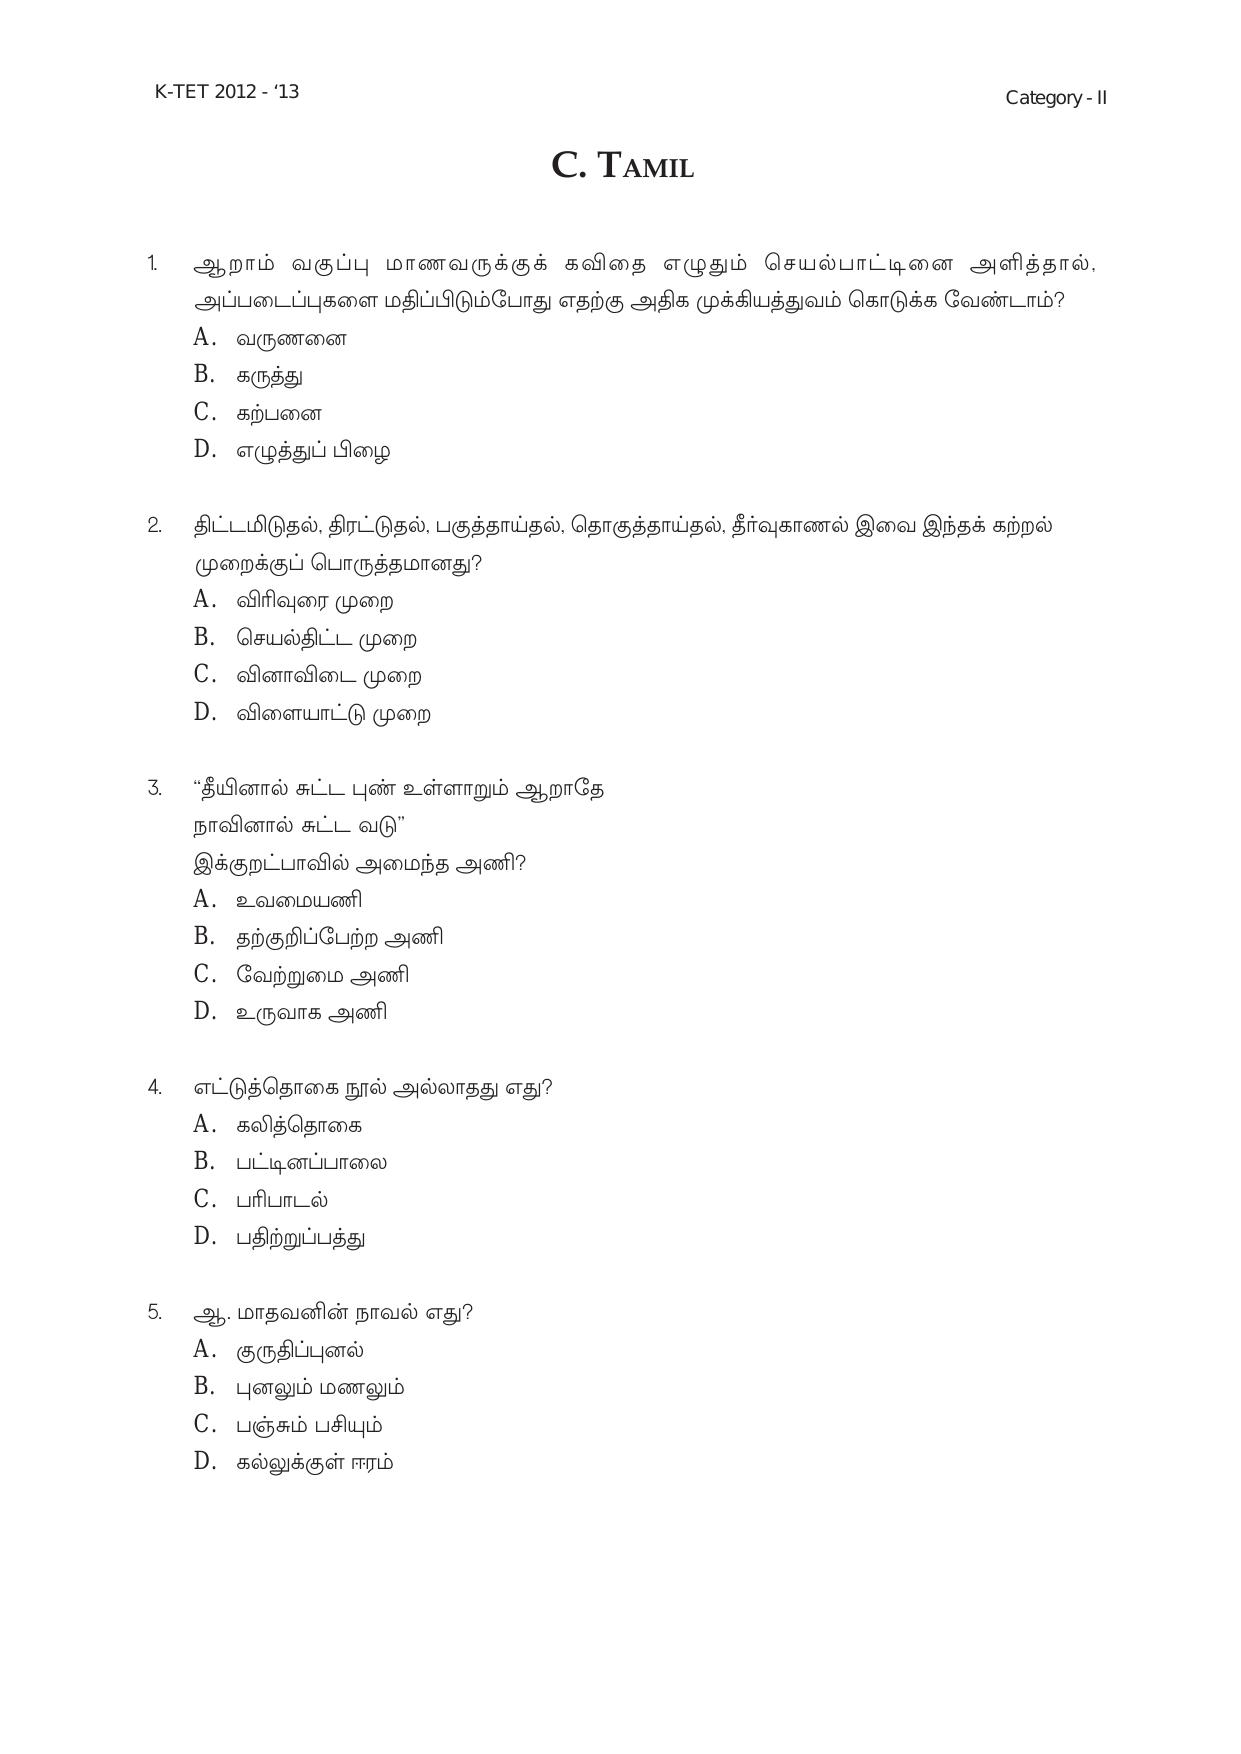 Kerala TET Upper Primary Teacher (Class 6-8) Category Model Papers - Page 6